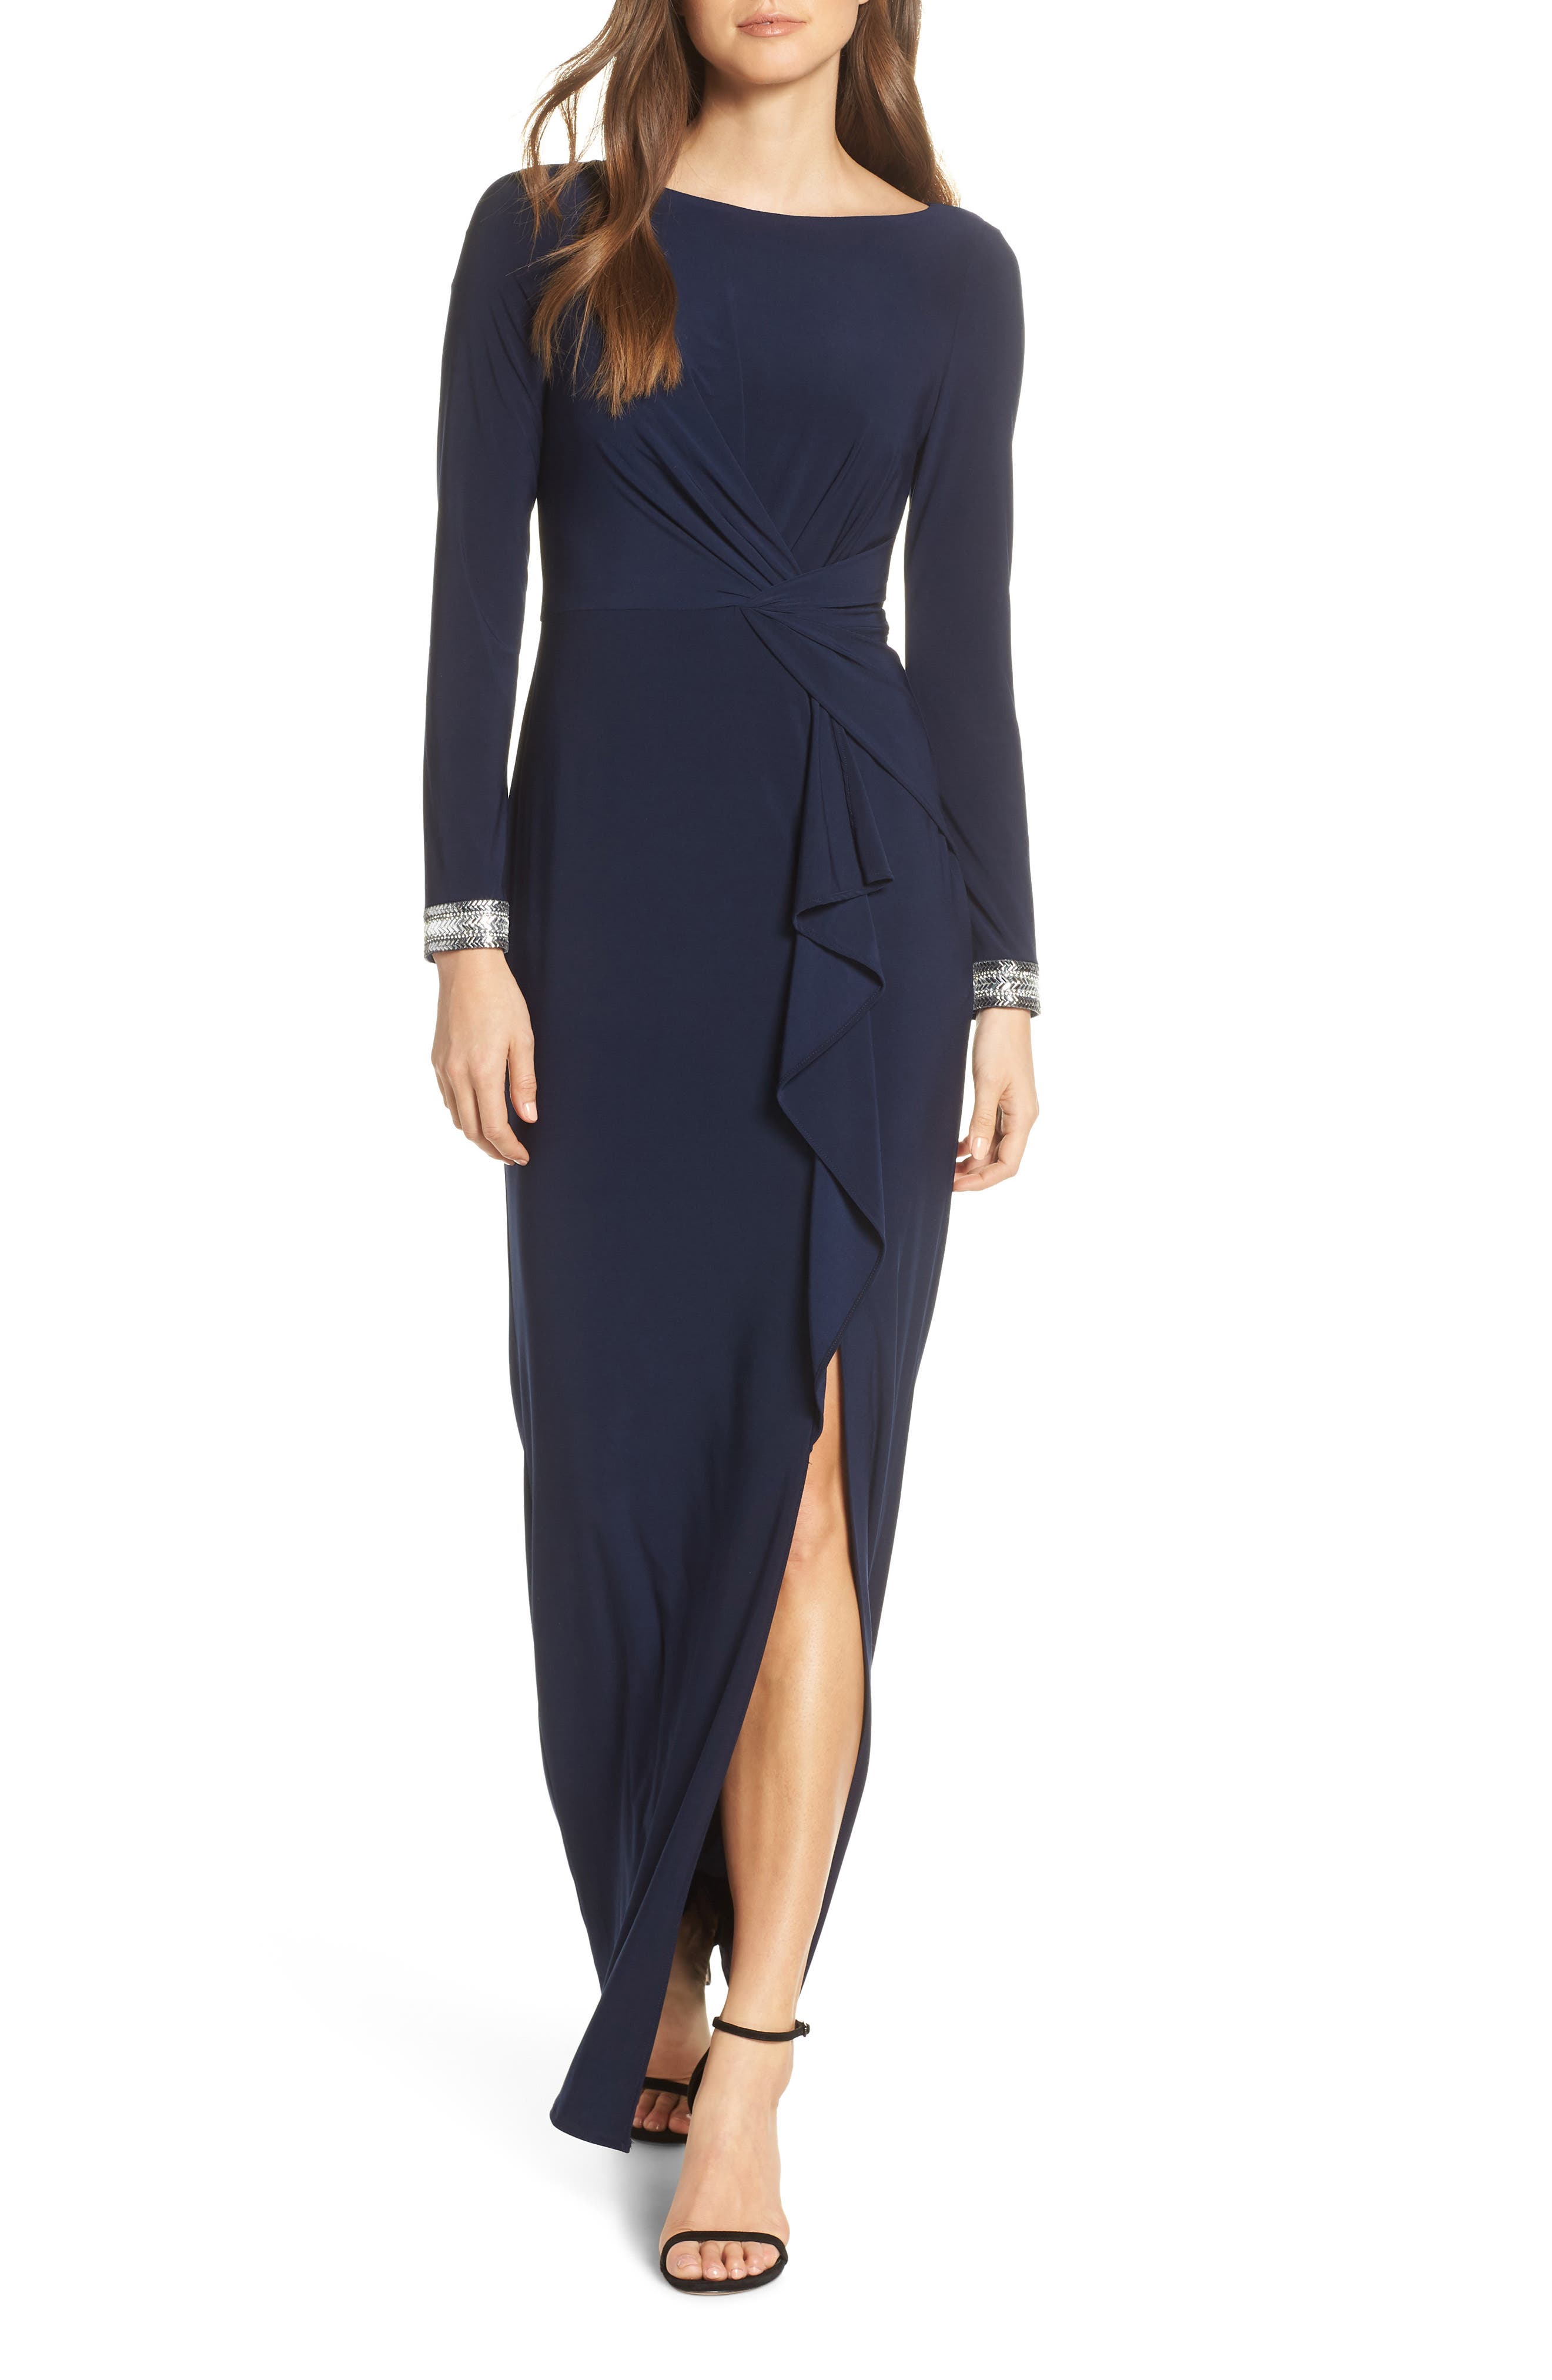 vince camuto beaded cuff ruched jersey dress